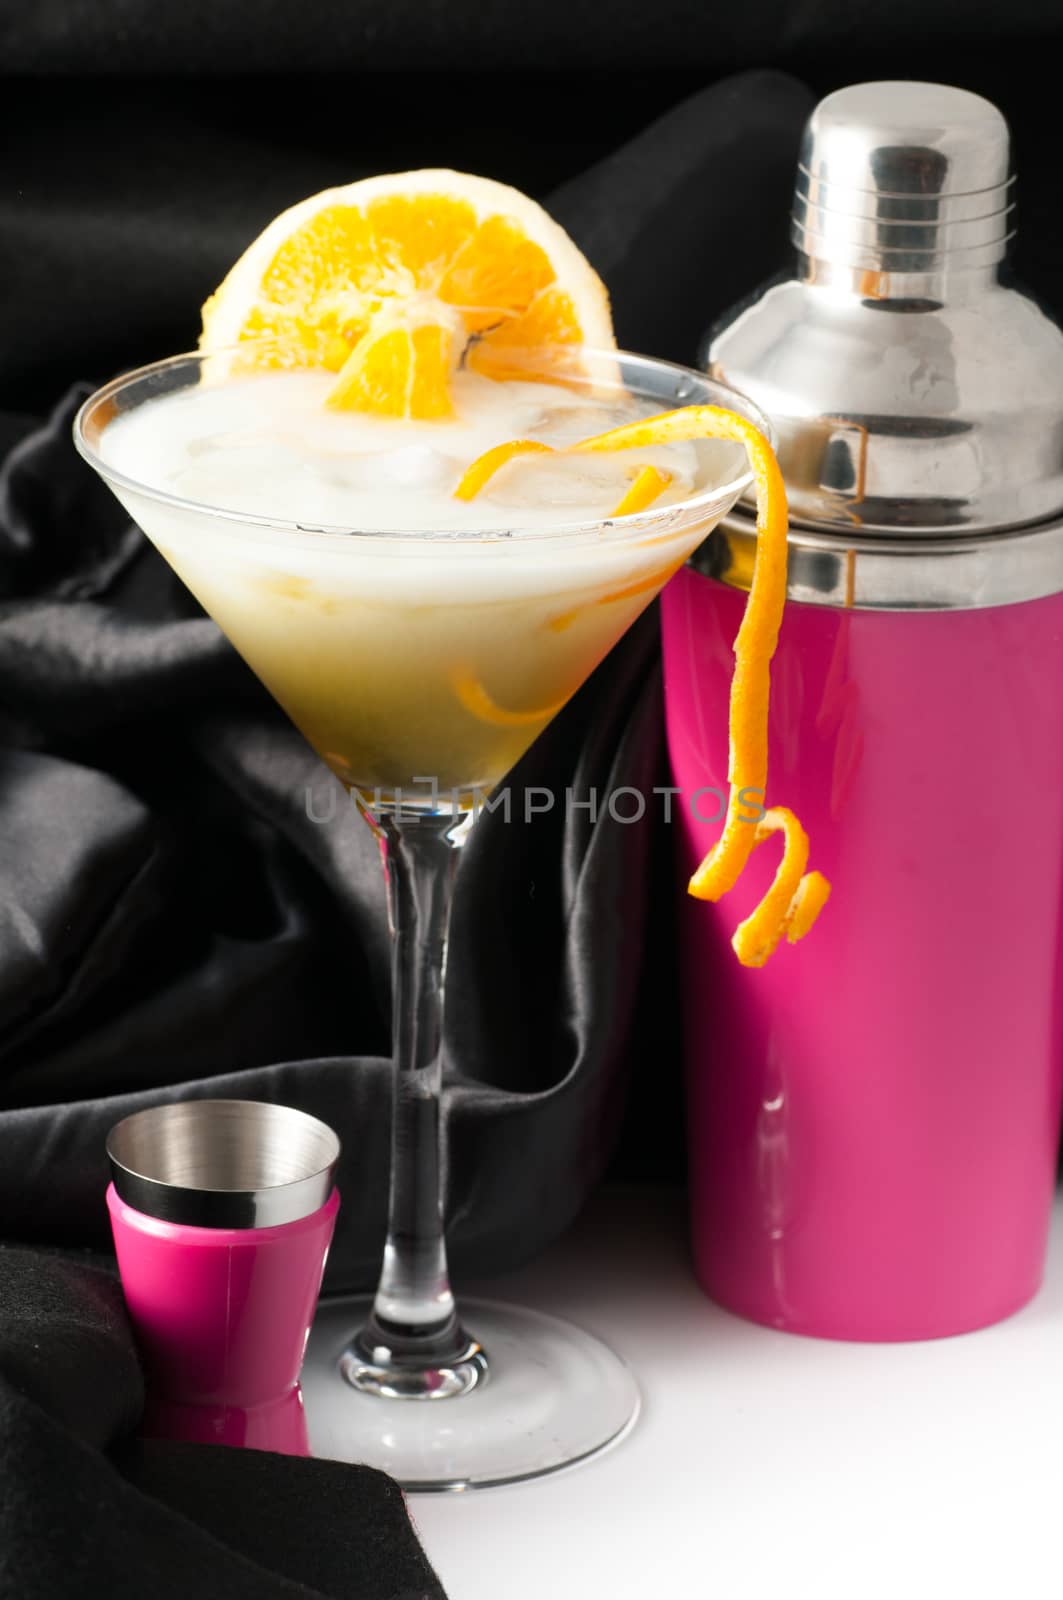 orange with pink cocktail shaker